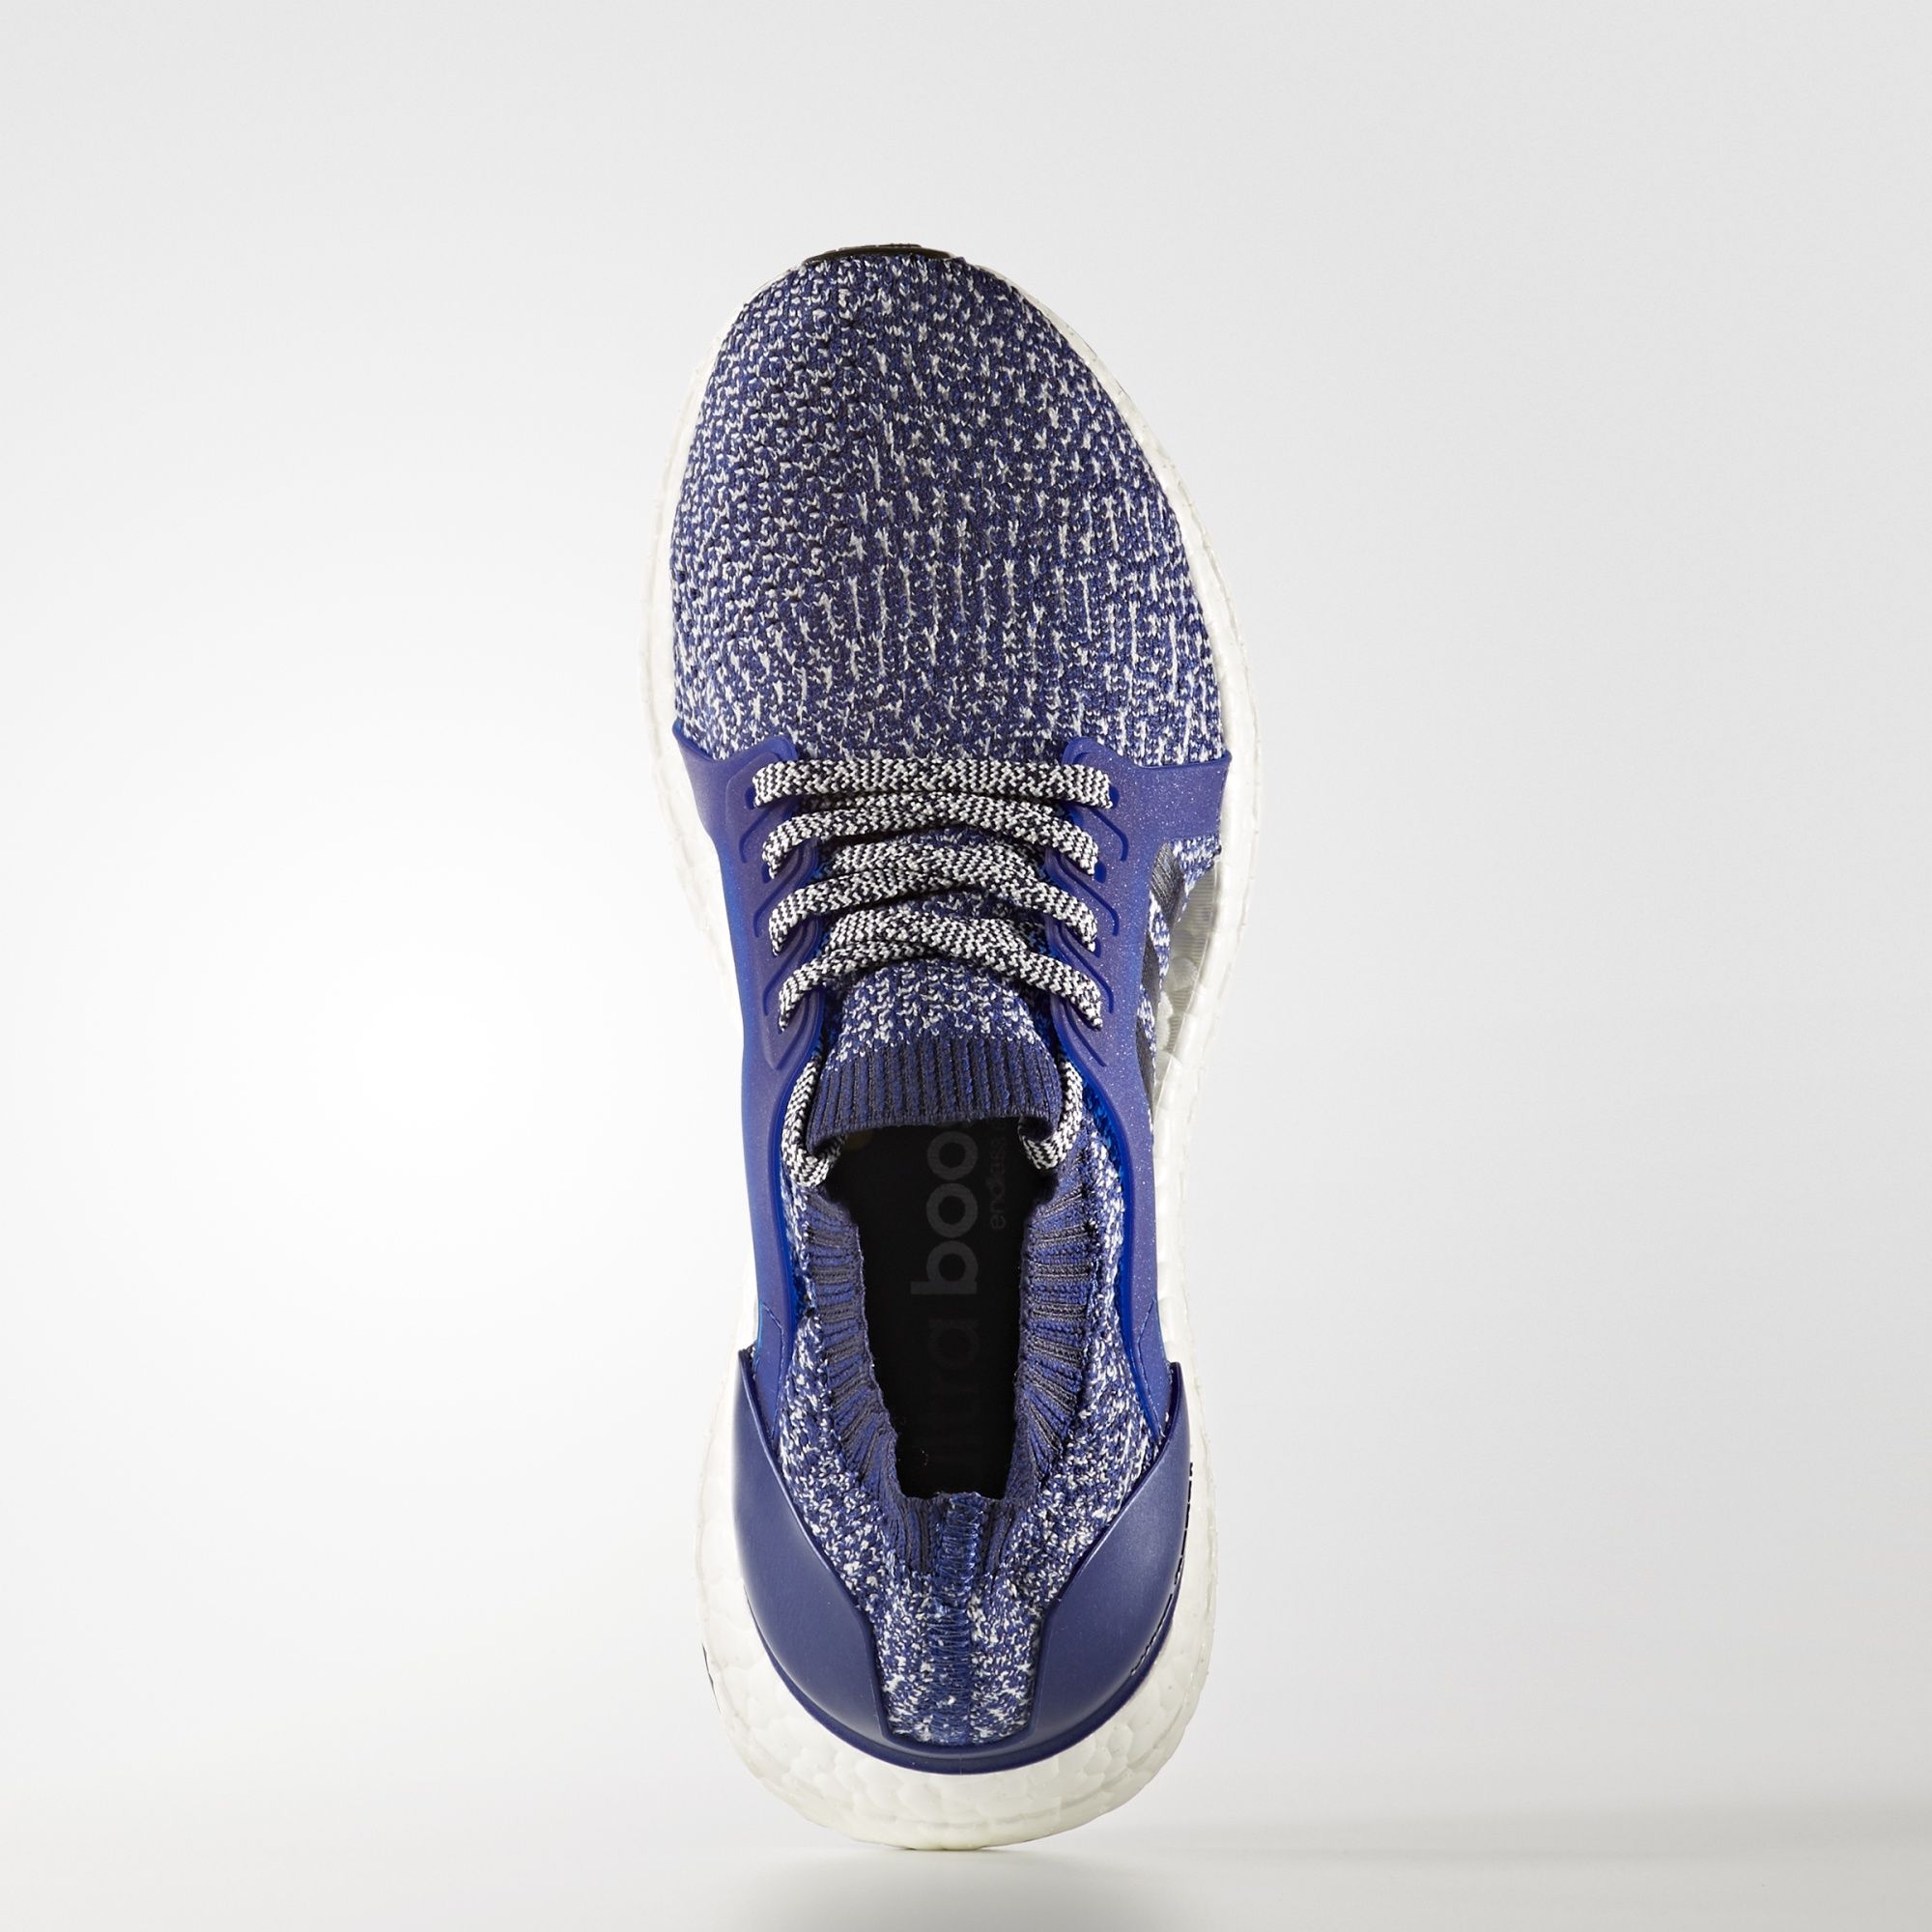 adidas-wmns-ultra-boost-x-parley-purple-mystery-ink-4